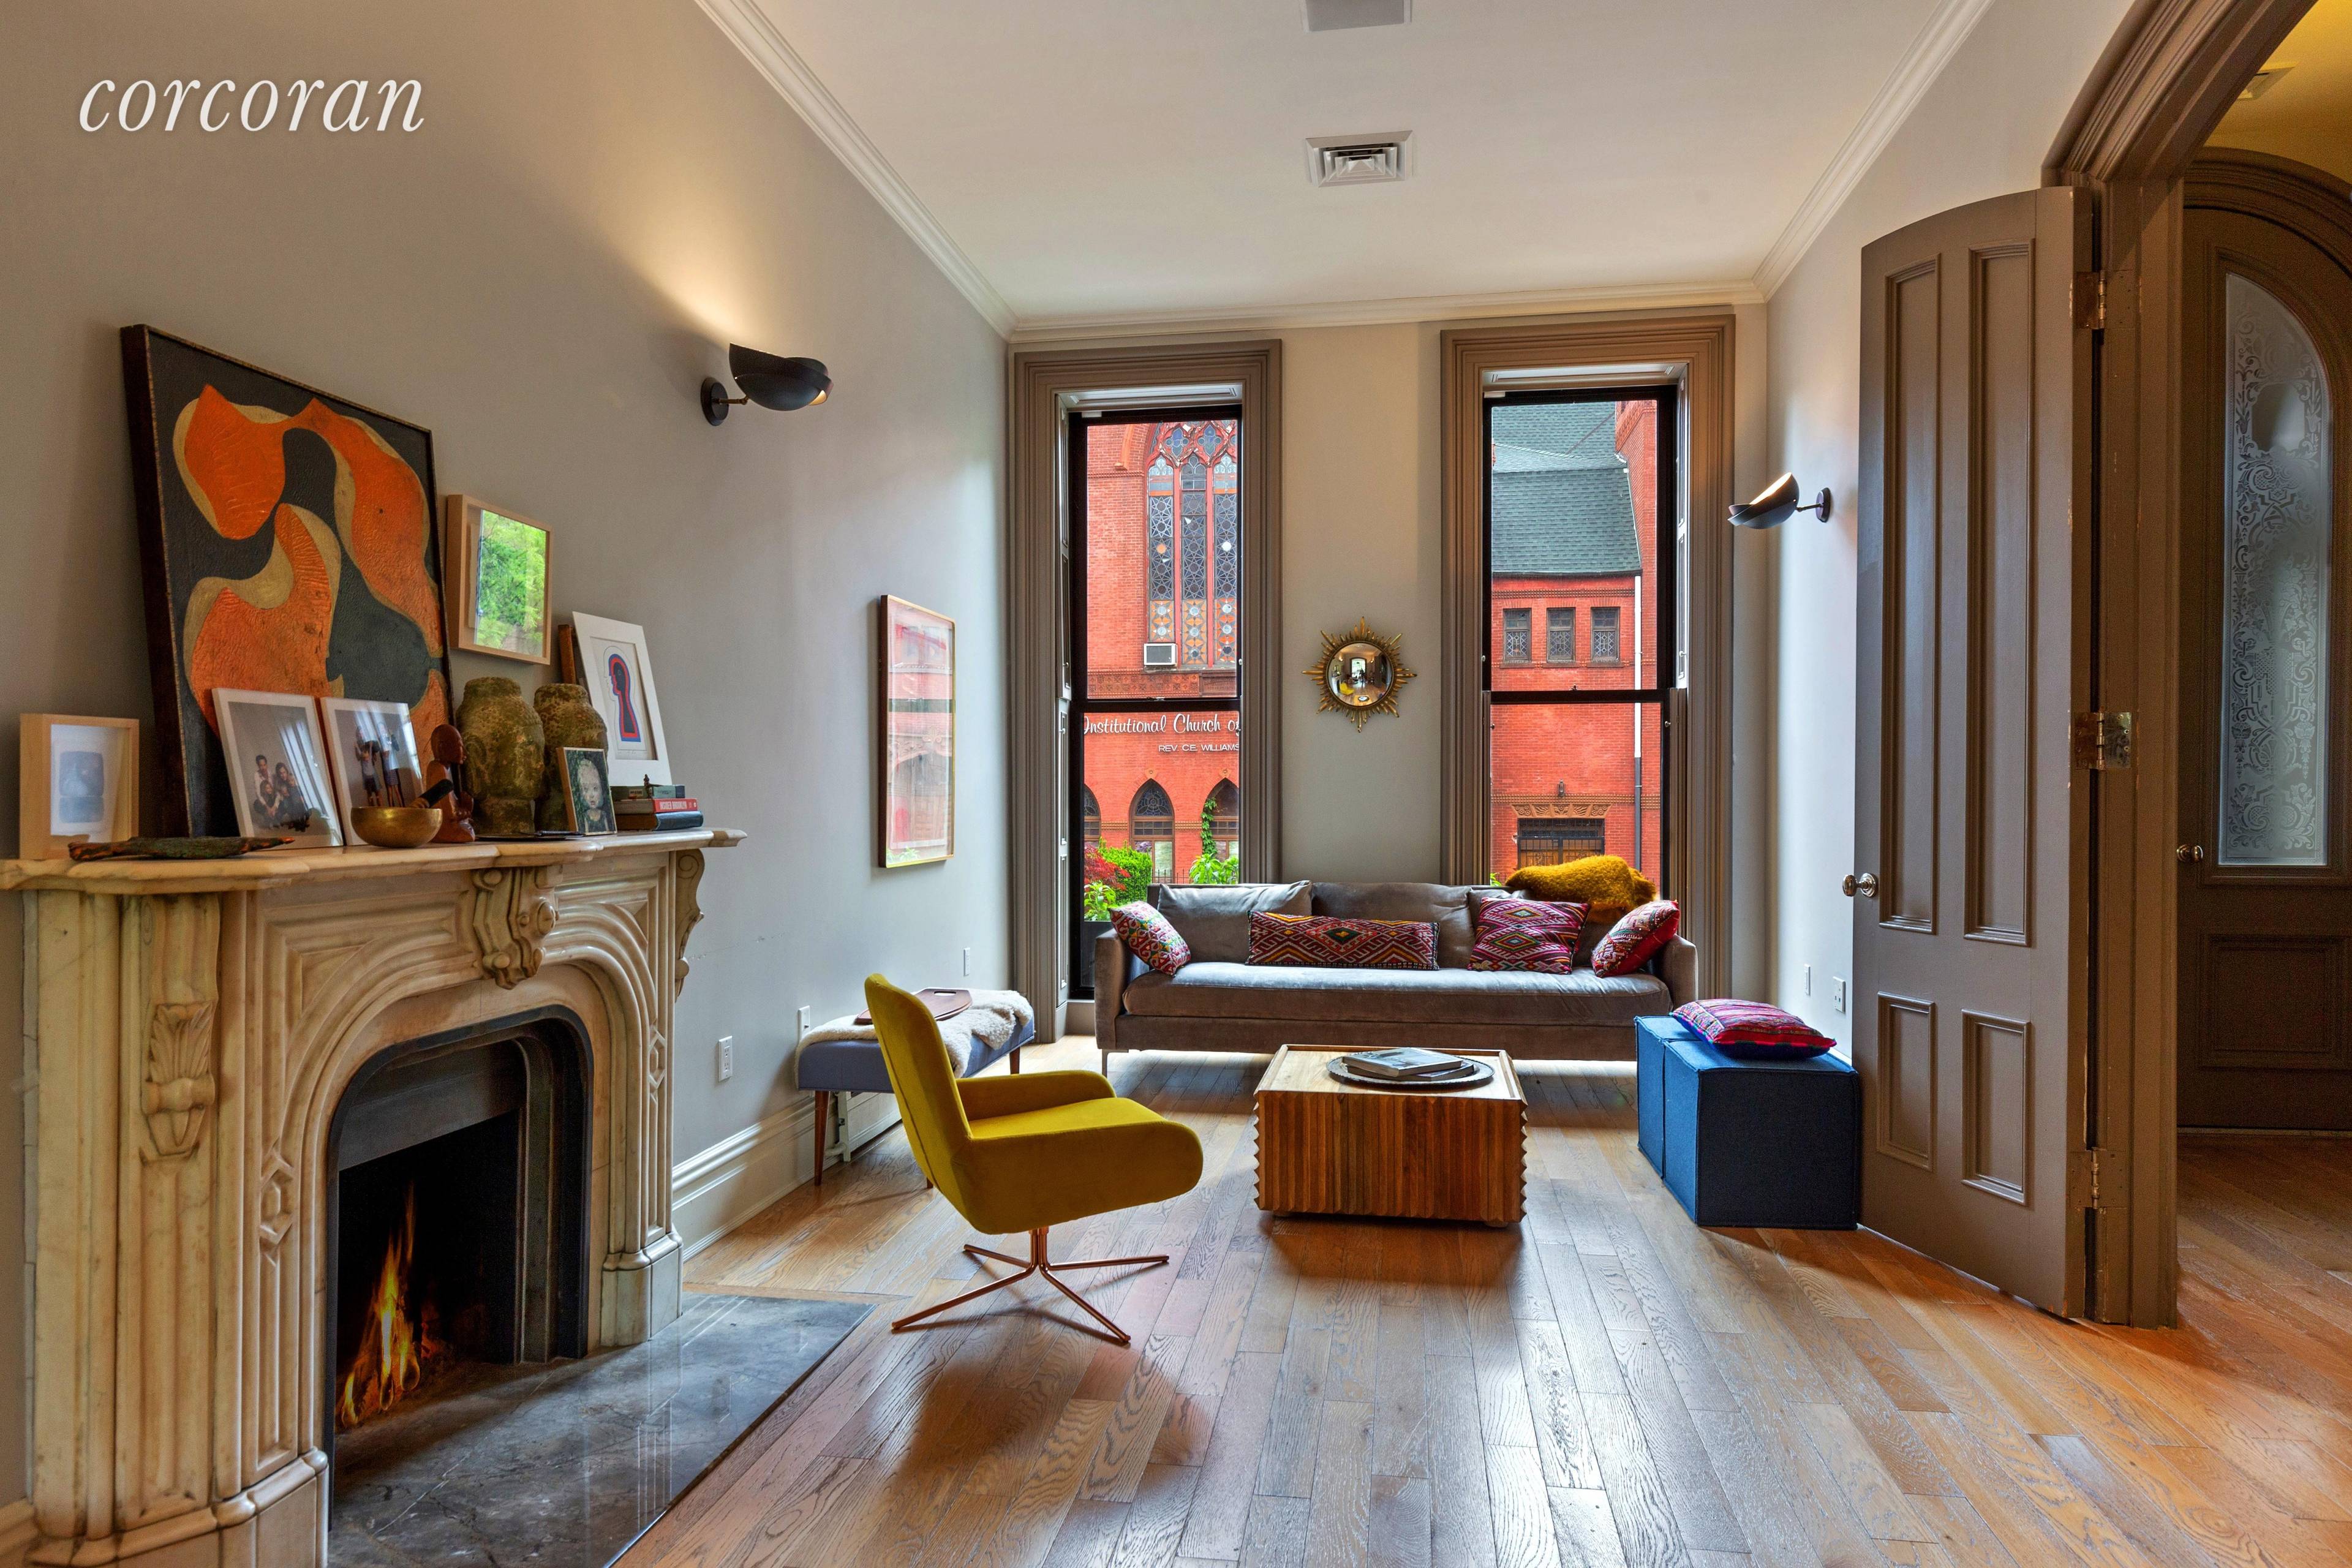 The house at 169 Adelphi is as gorgeous a traditional Ft Green brownstone as you are ever going to find.